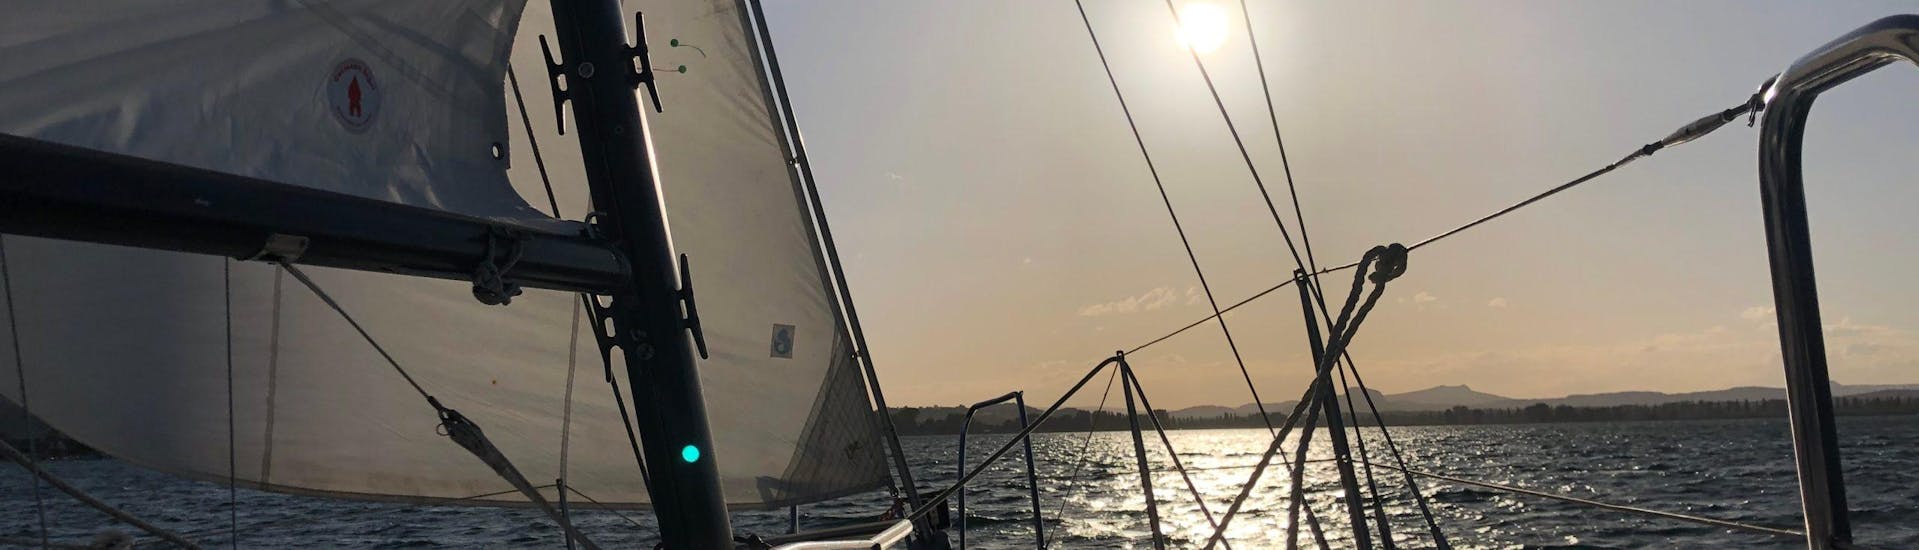 The sailboat Bavaria 808 on a private sailing trip on Lake Constance with MB Events & Adventures.